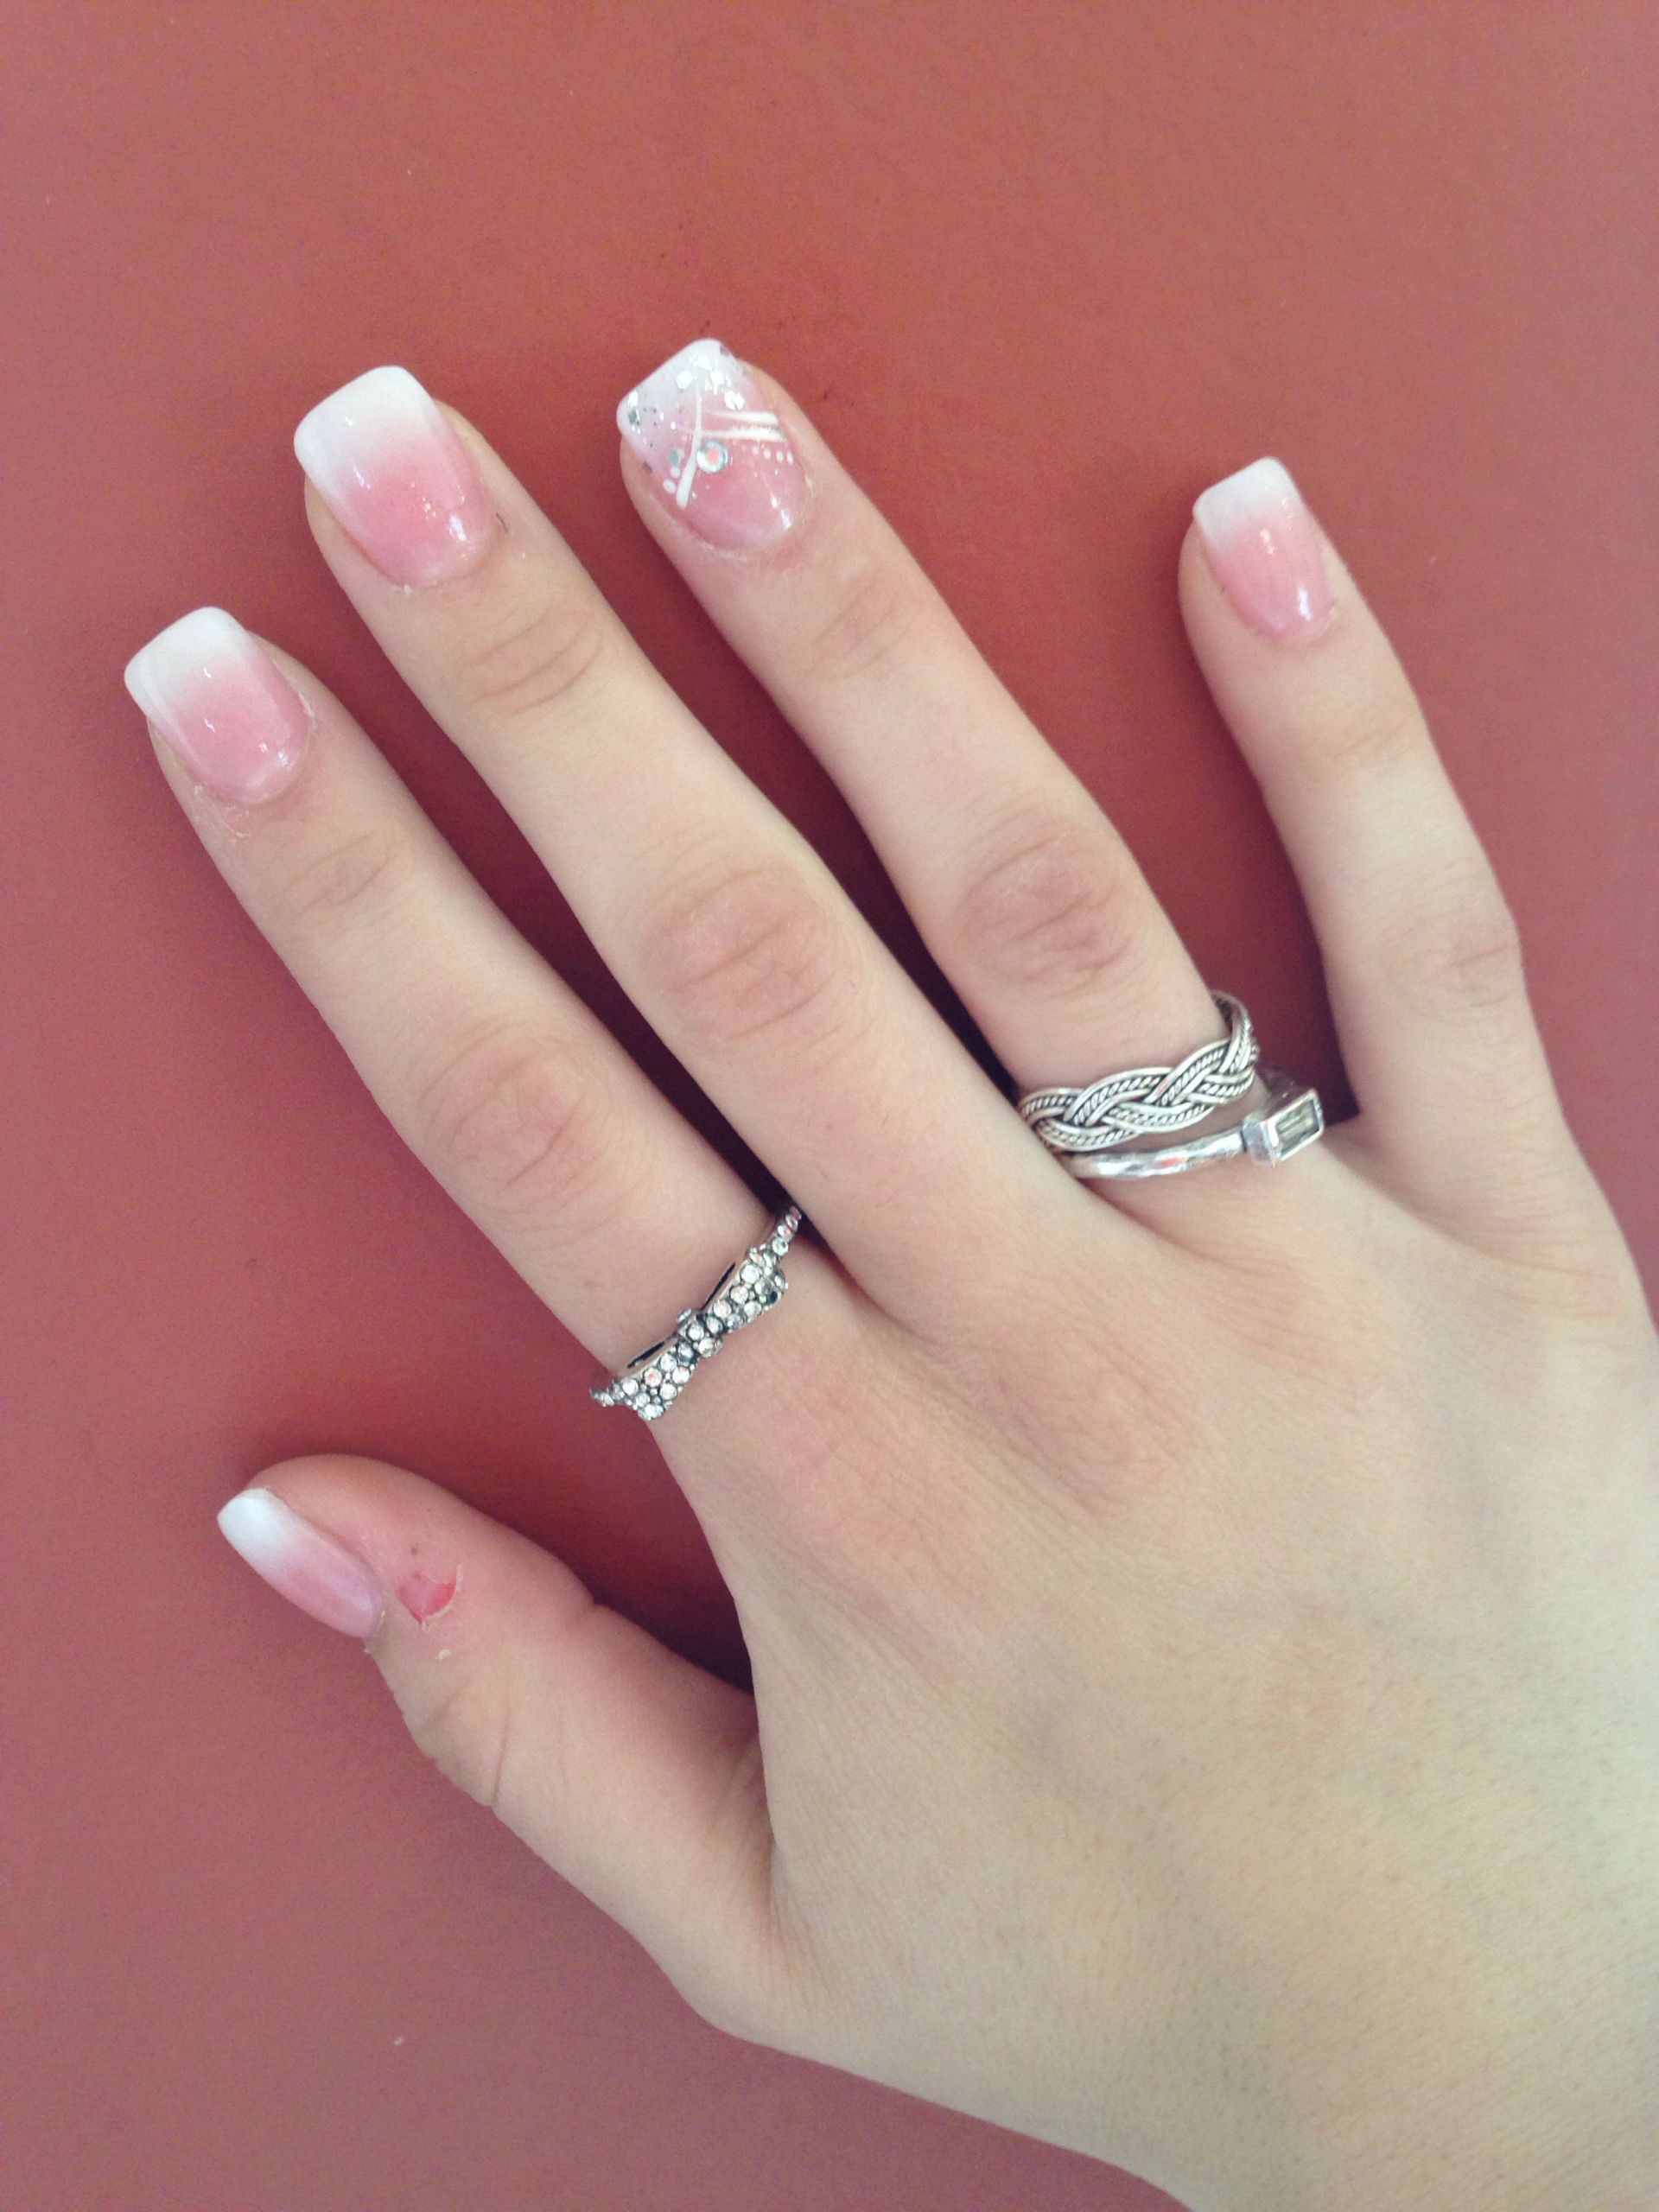 Full Set Nail Ideas
 Full set acrylics Ombre faded French manicure with